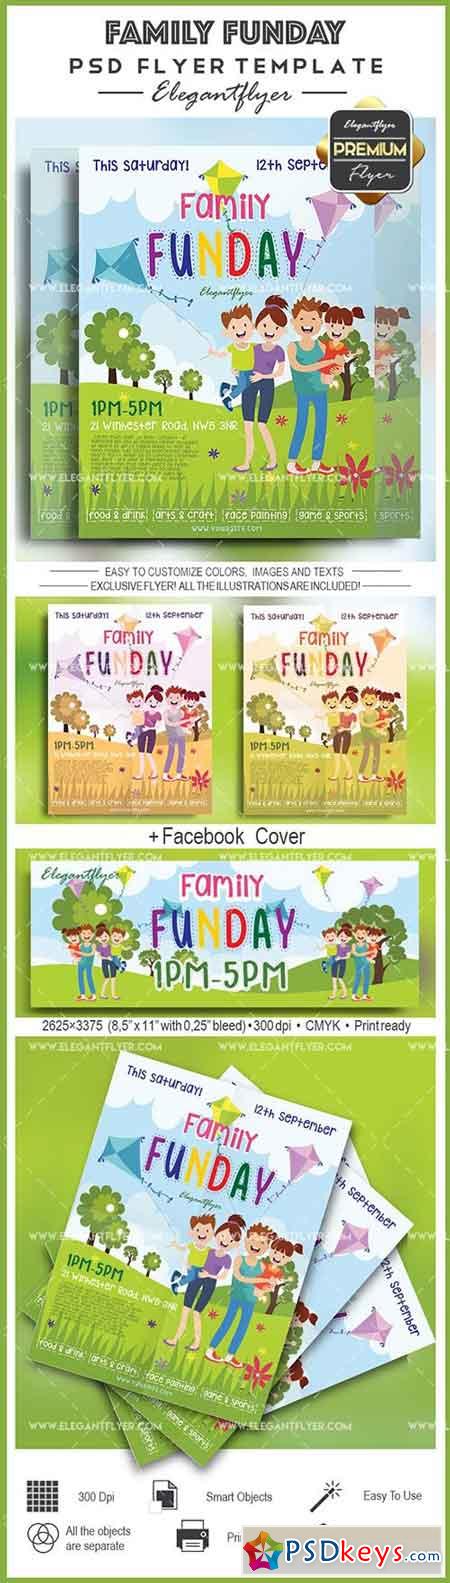 Family Funday- Flyer PSD Template + Facebook Cover